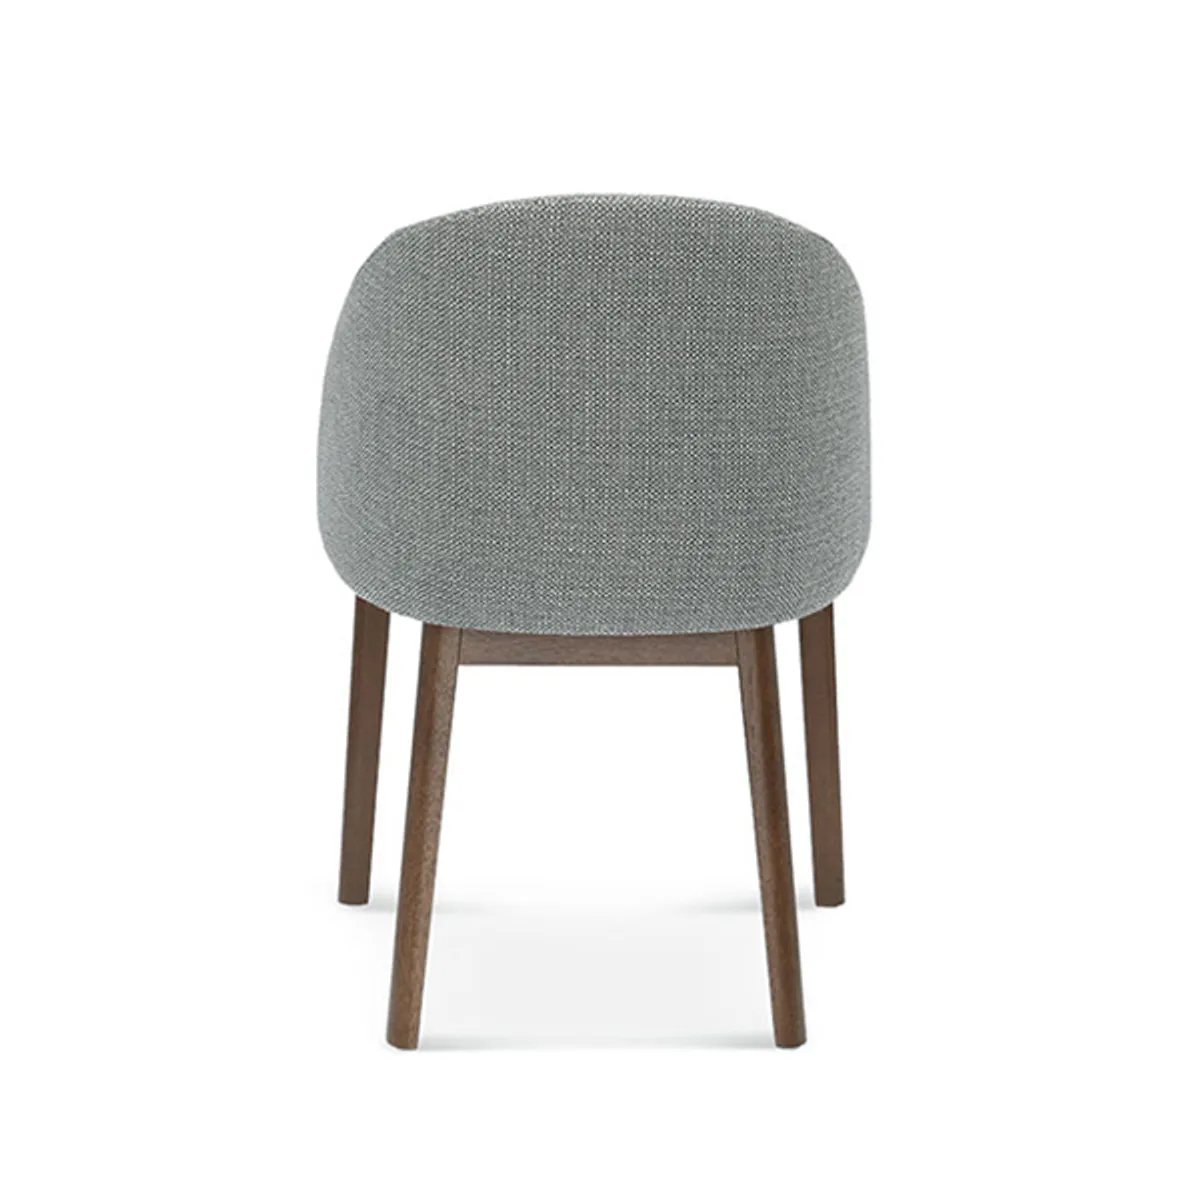 Luca Chair Upholstered For Commercial Use By Insideoutcontracts 020